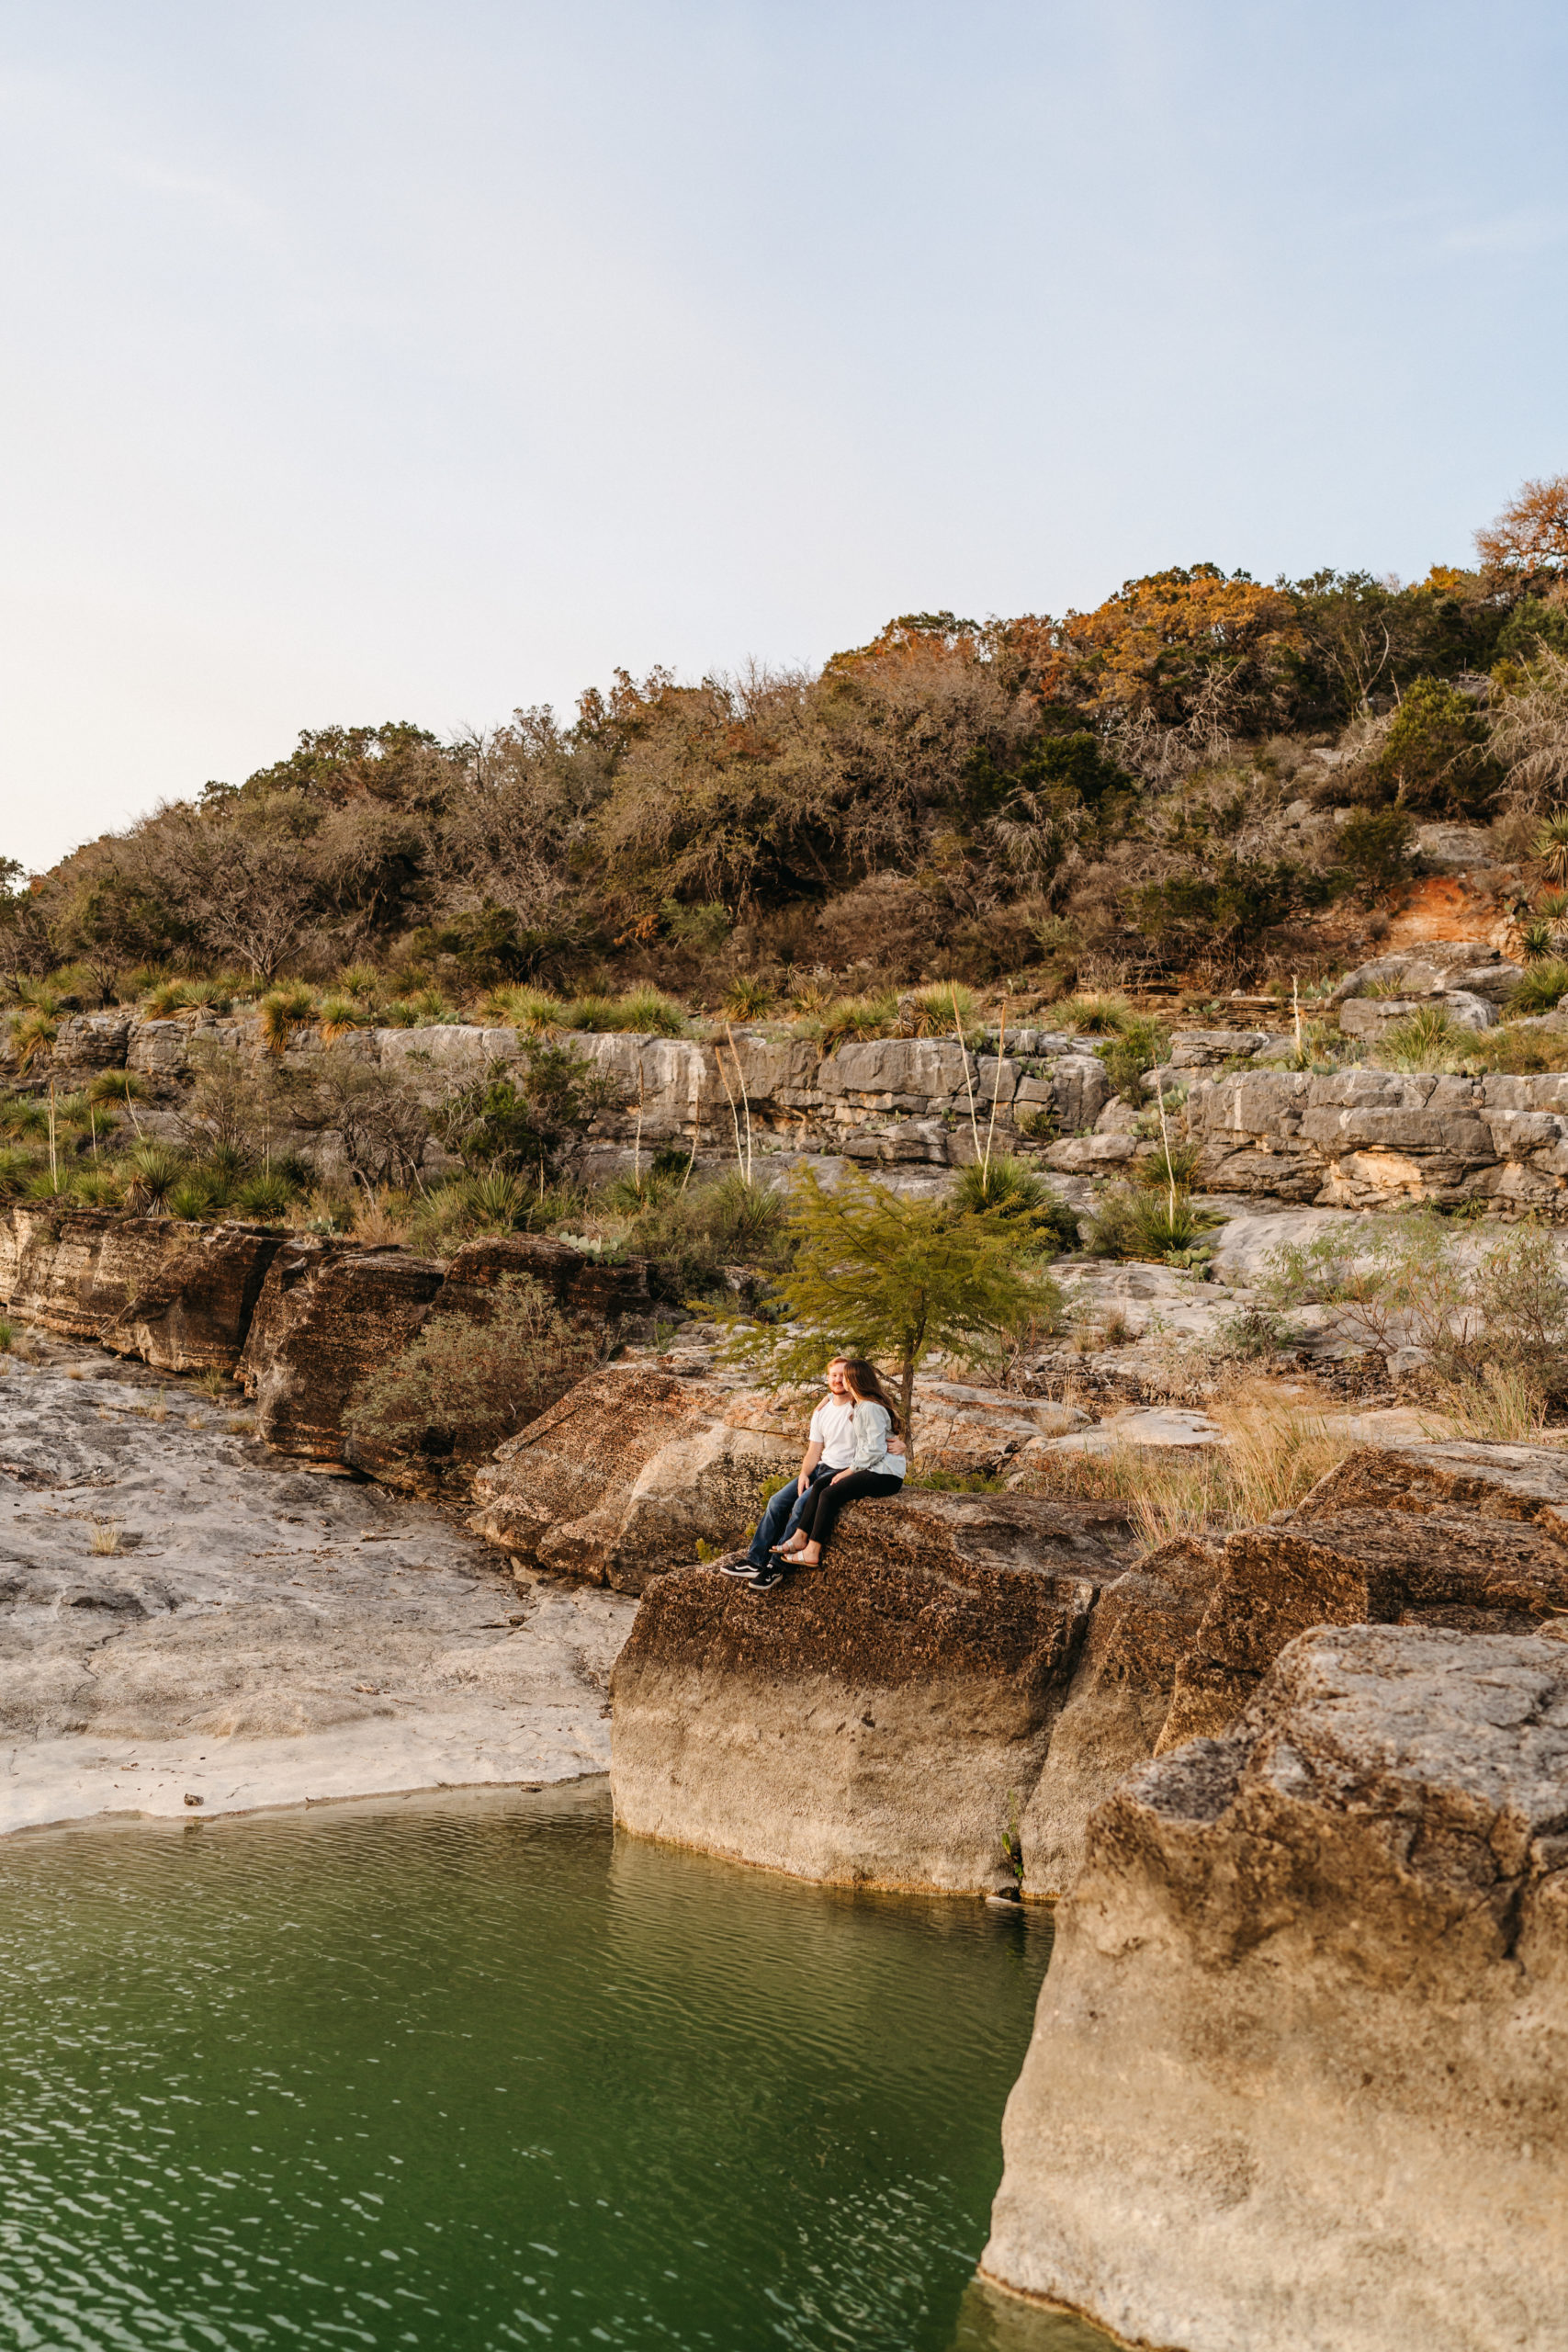 This timeless engagement session took place at the gorgeous Pedernales Falls State Park in Austin, Texas. We hiked the stunning Texas landscape to come across the infamous falls for their adventure engagement session. The couple’s outfit perfectly exuded their personality while also letting the scenery speak for itself. Angelina Loreta Photography created timeless engagement pictures for the Austin couple.